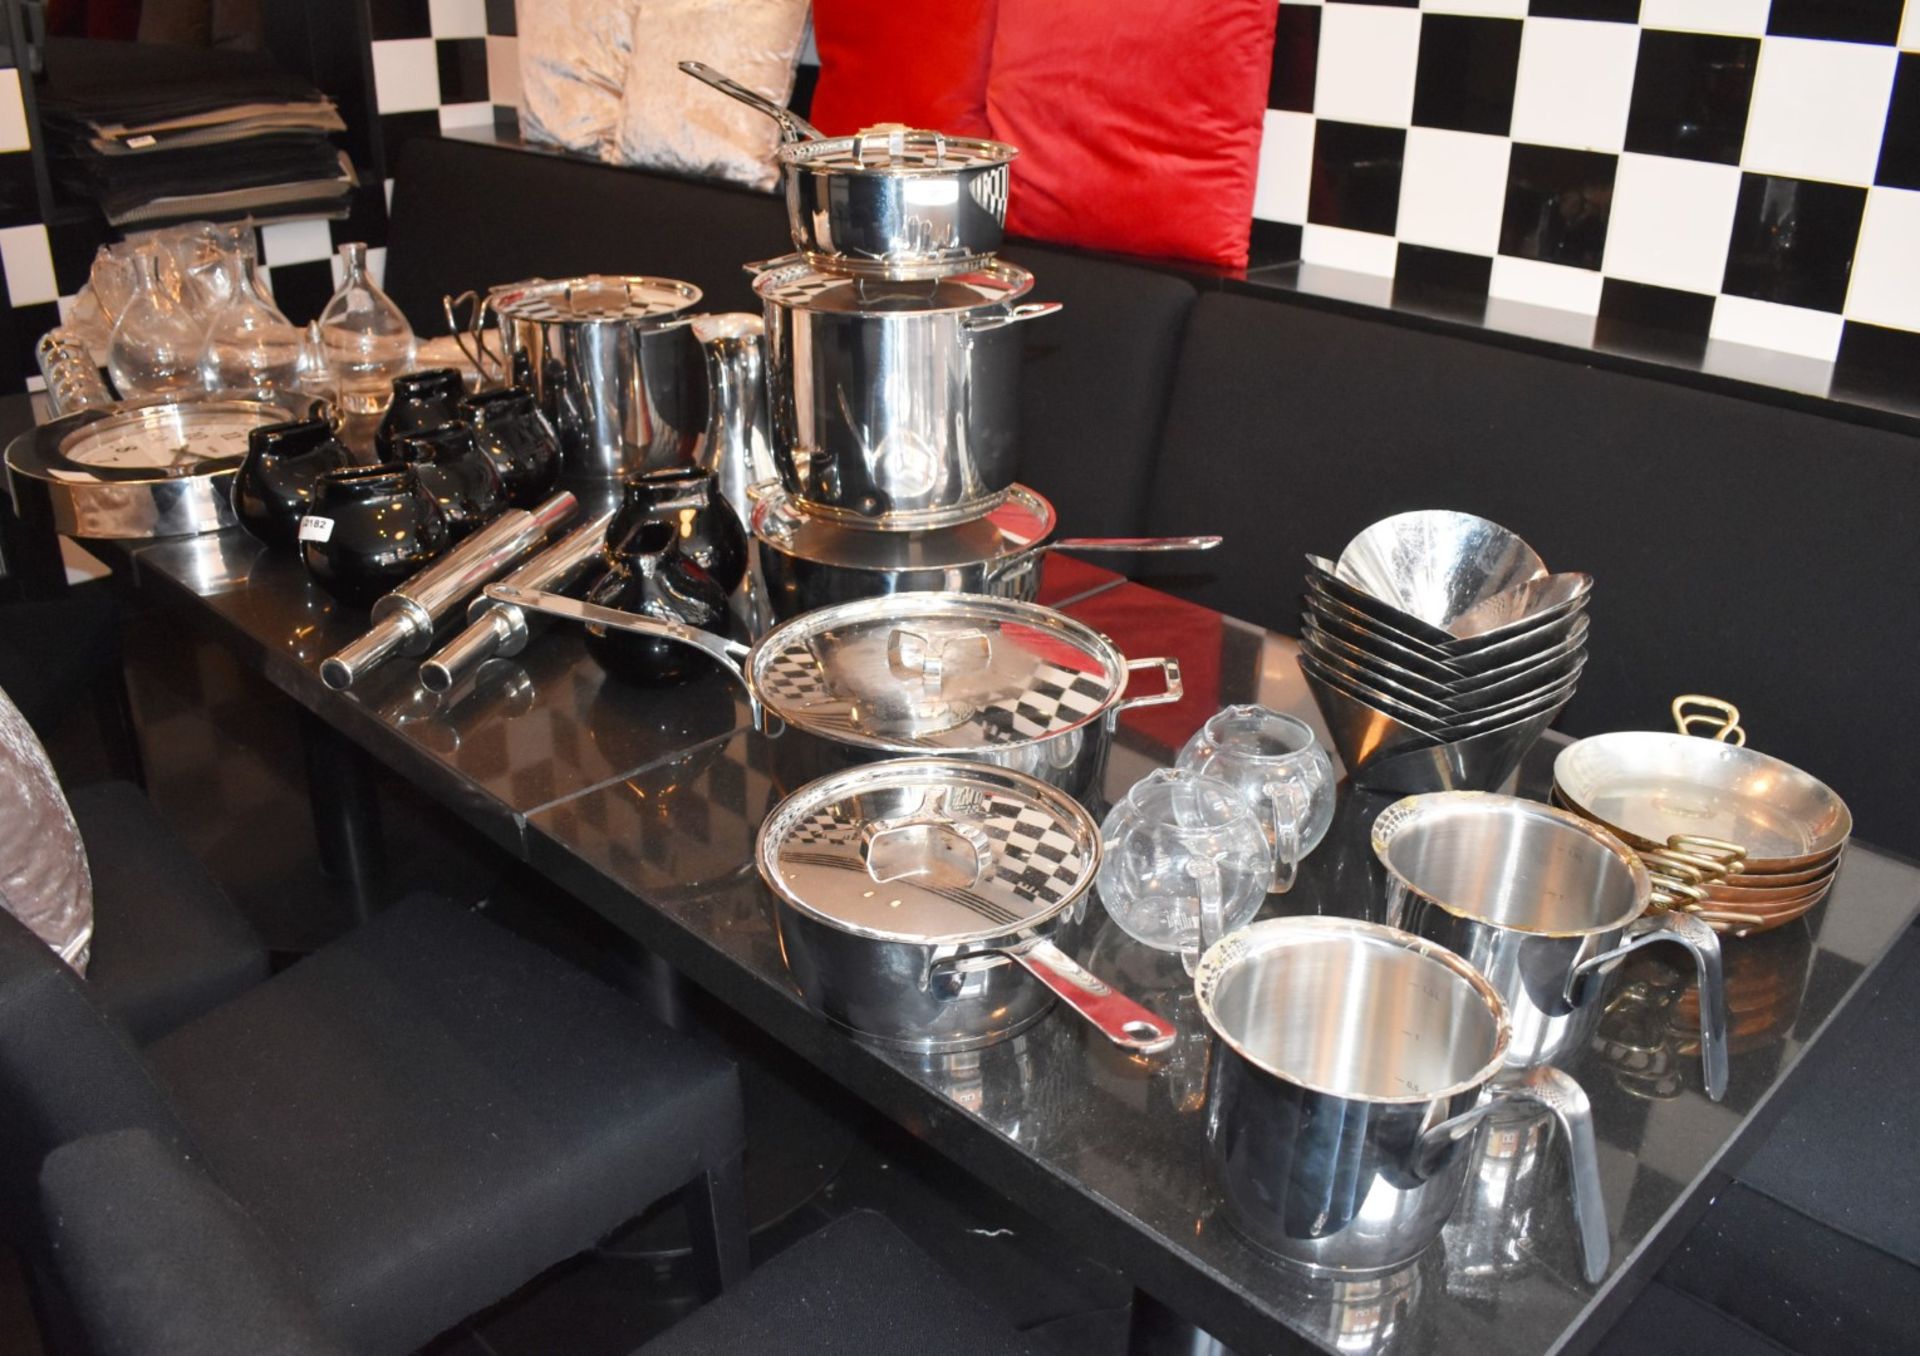 Approx 41 x Items of Kitchen and Tableware - Includes Stainless Steel Rolling Pins, Wall Clock,